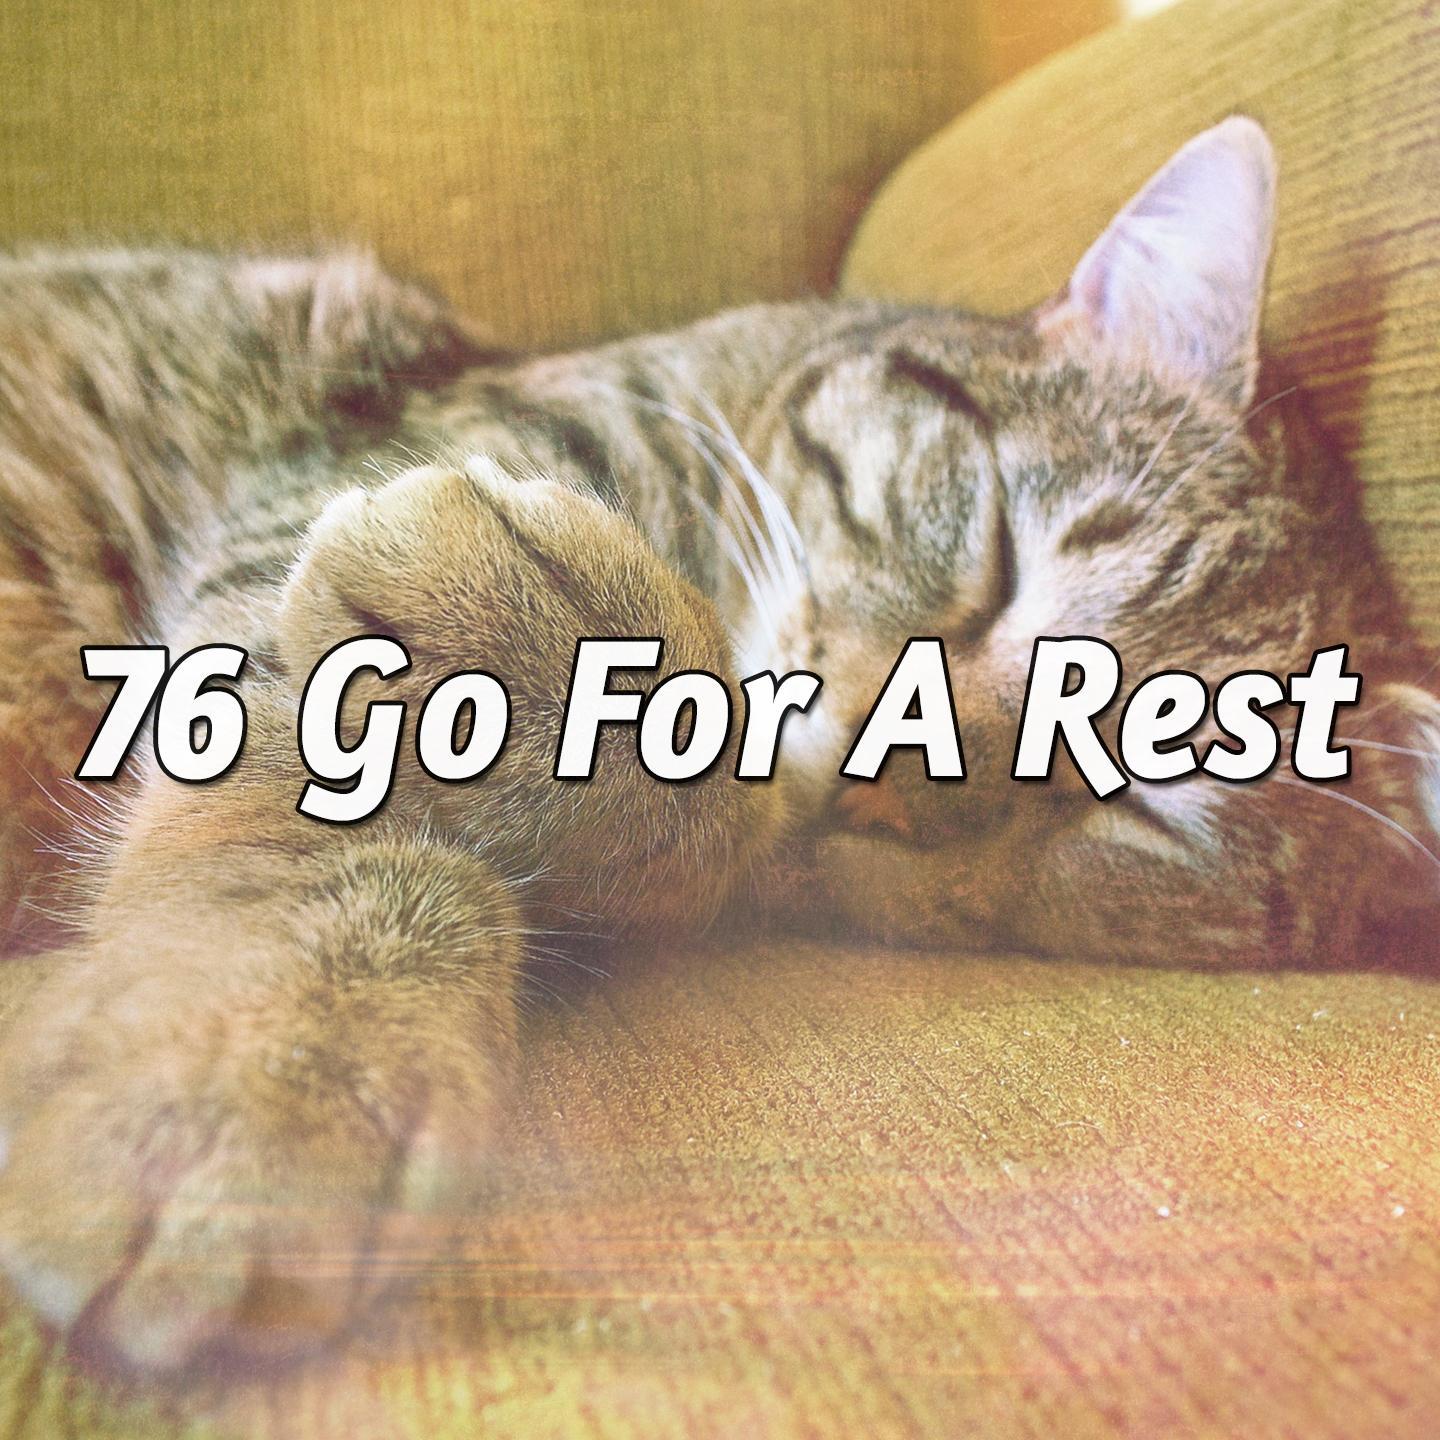 76 Go For a Rest